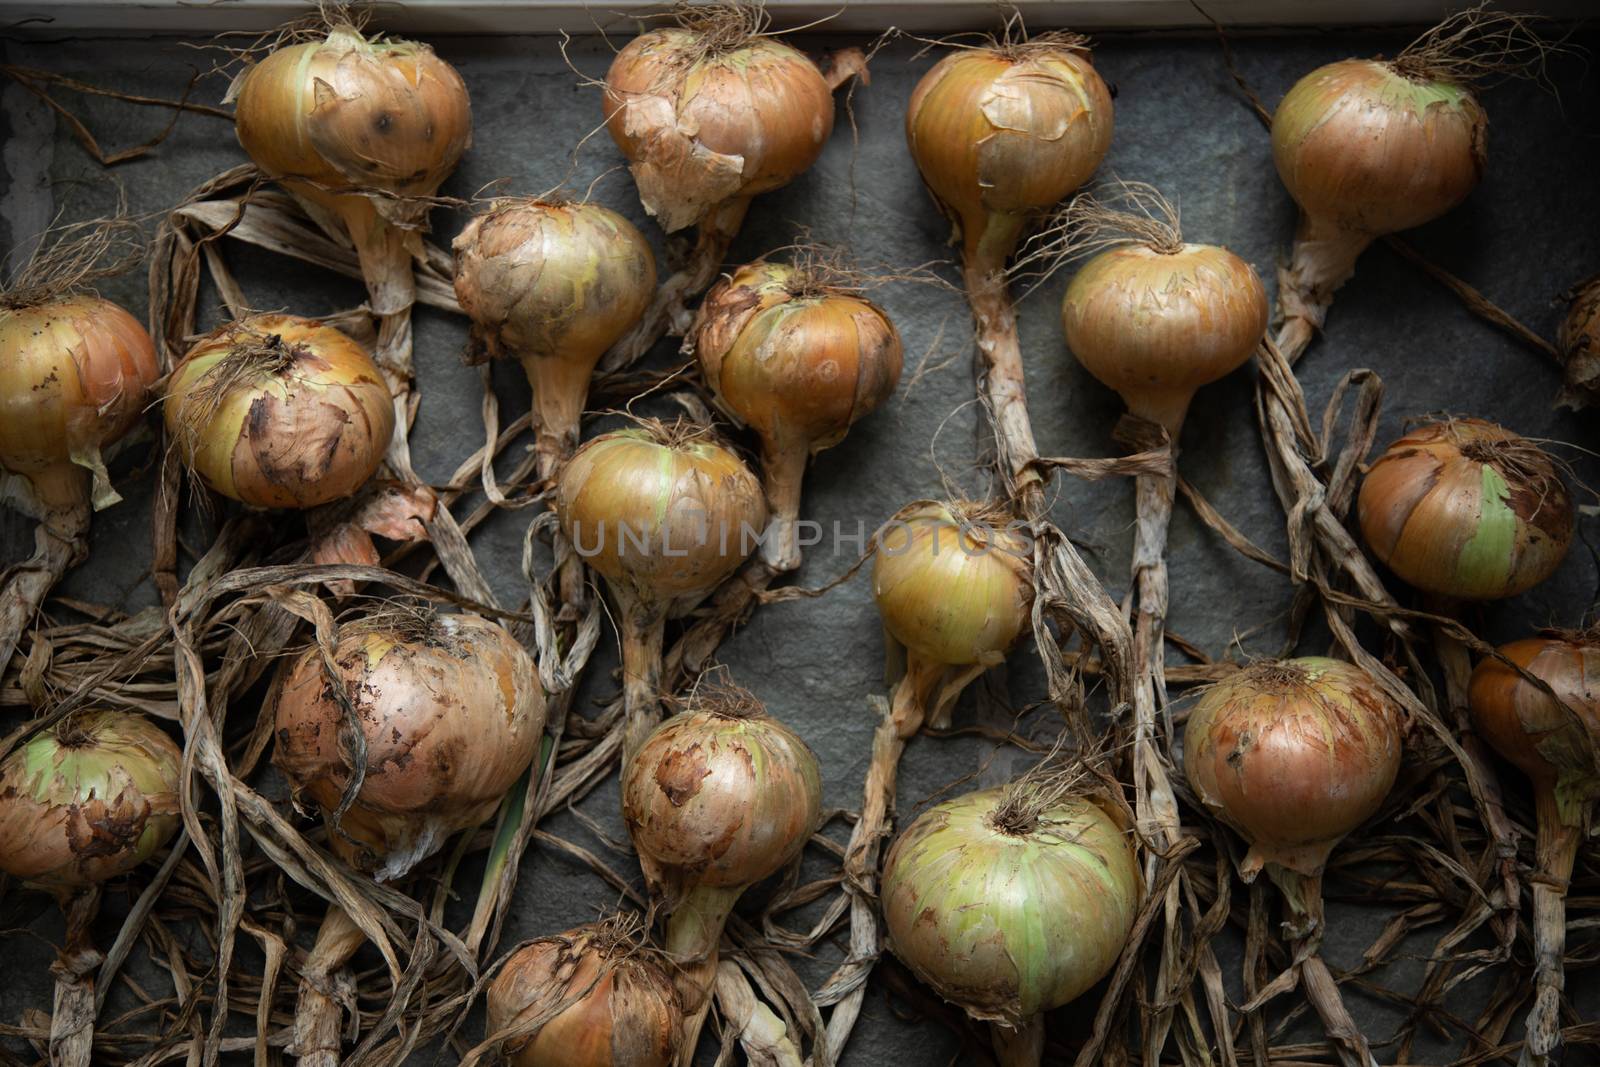 Onions harvested in autumn and laid out to dry,  by kgboxford